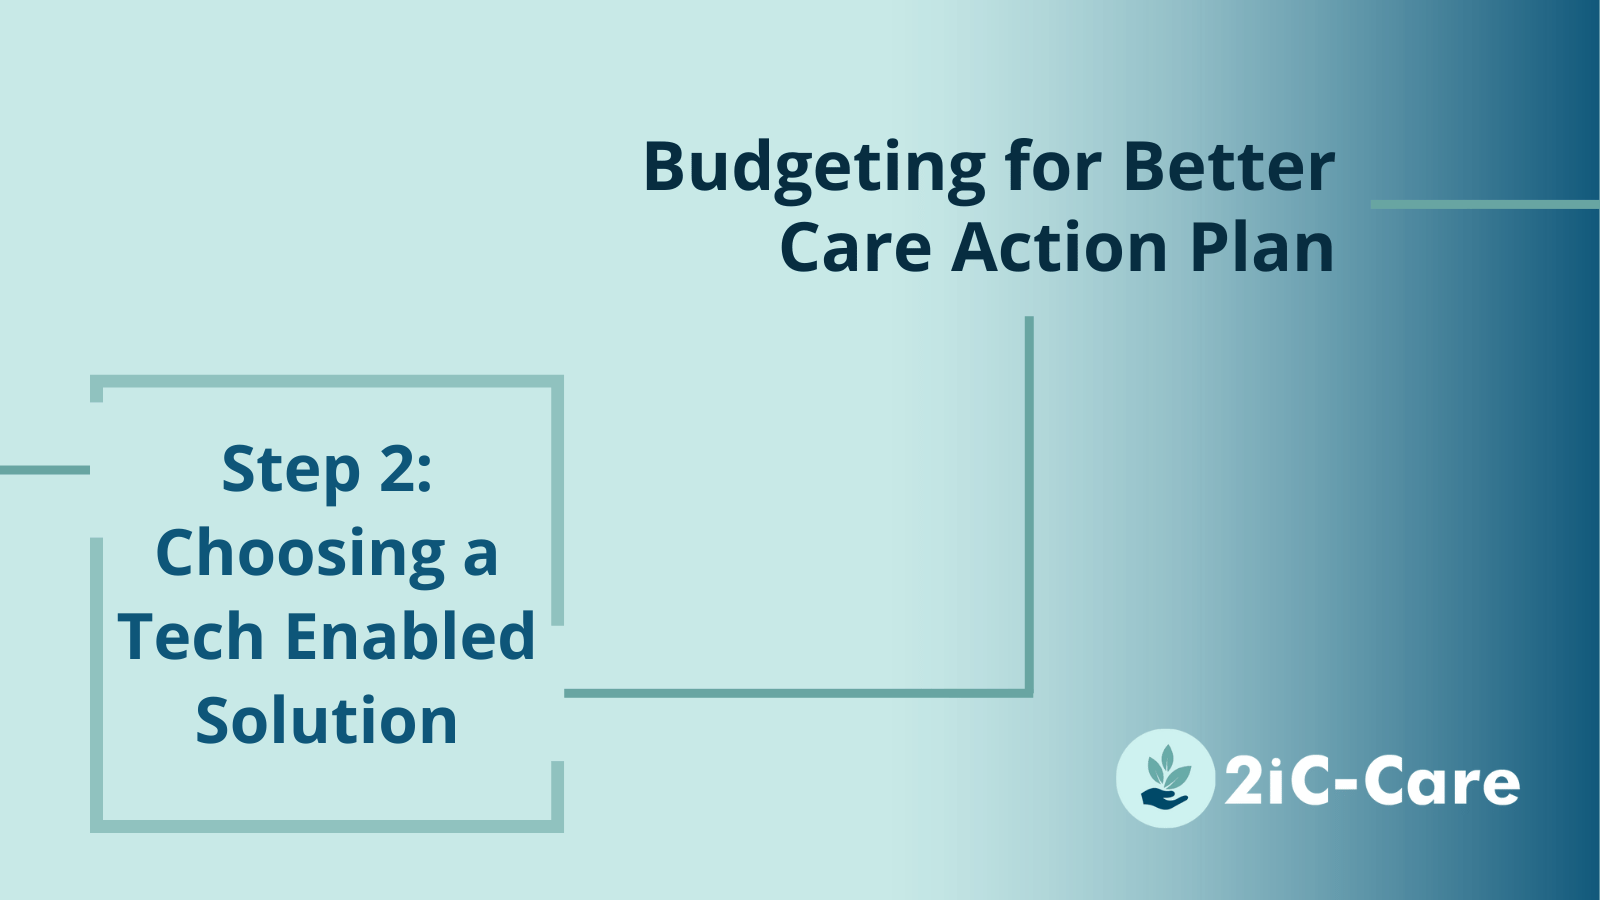 Budgeting for Better Care: Choosing a Tech Enabled Solution